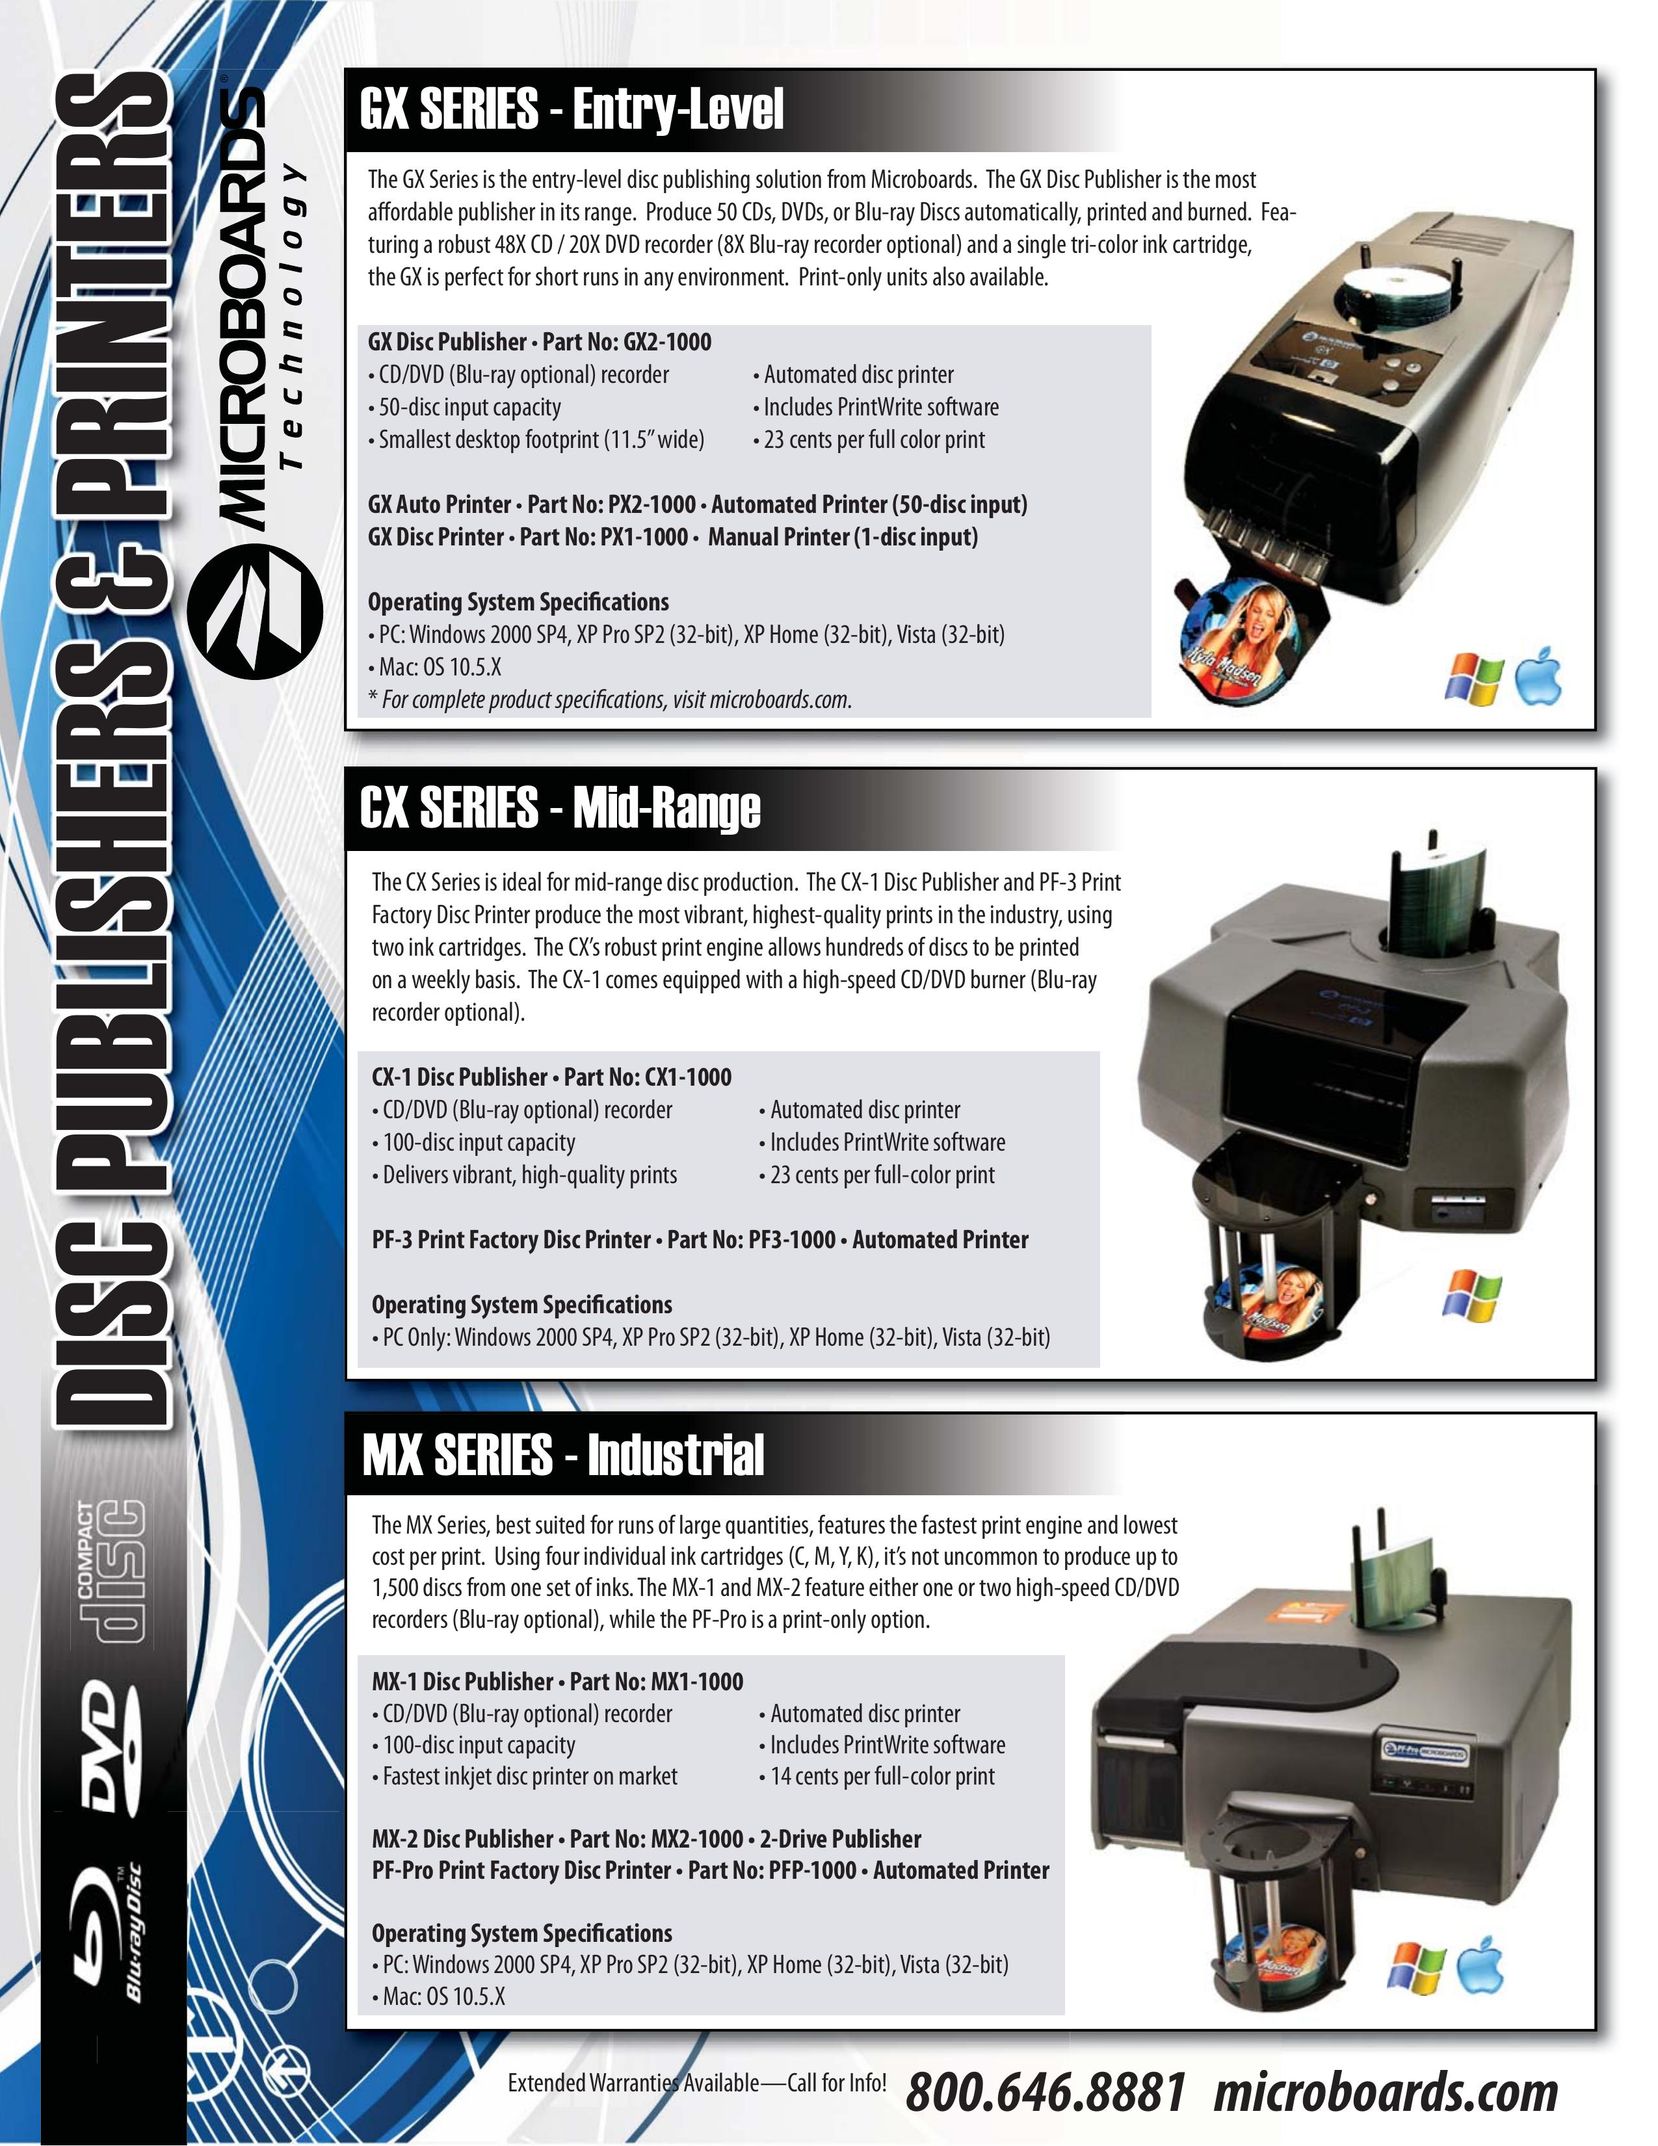 MicroBoards Technology PX2-1000 Printer User Manual